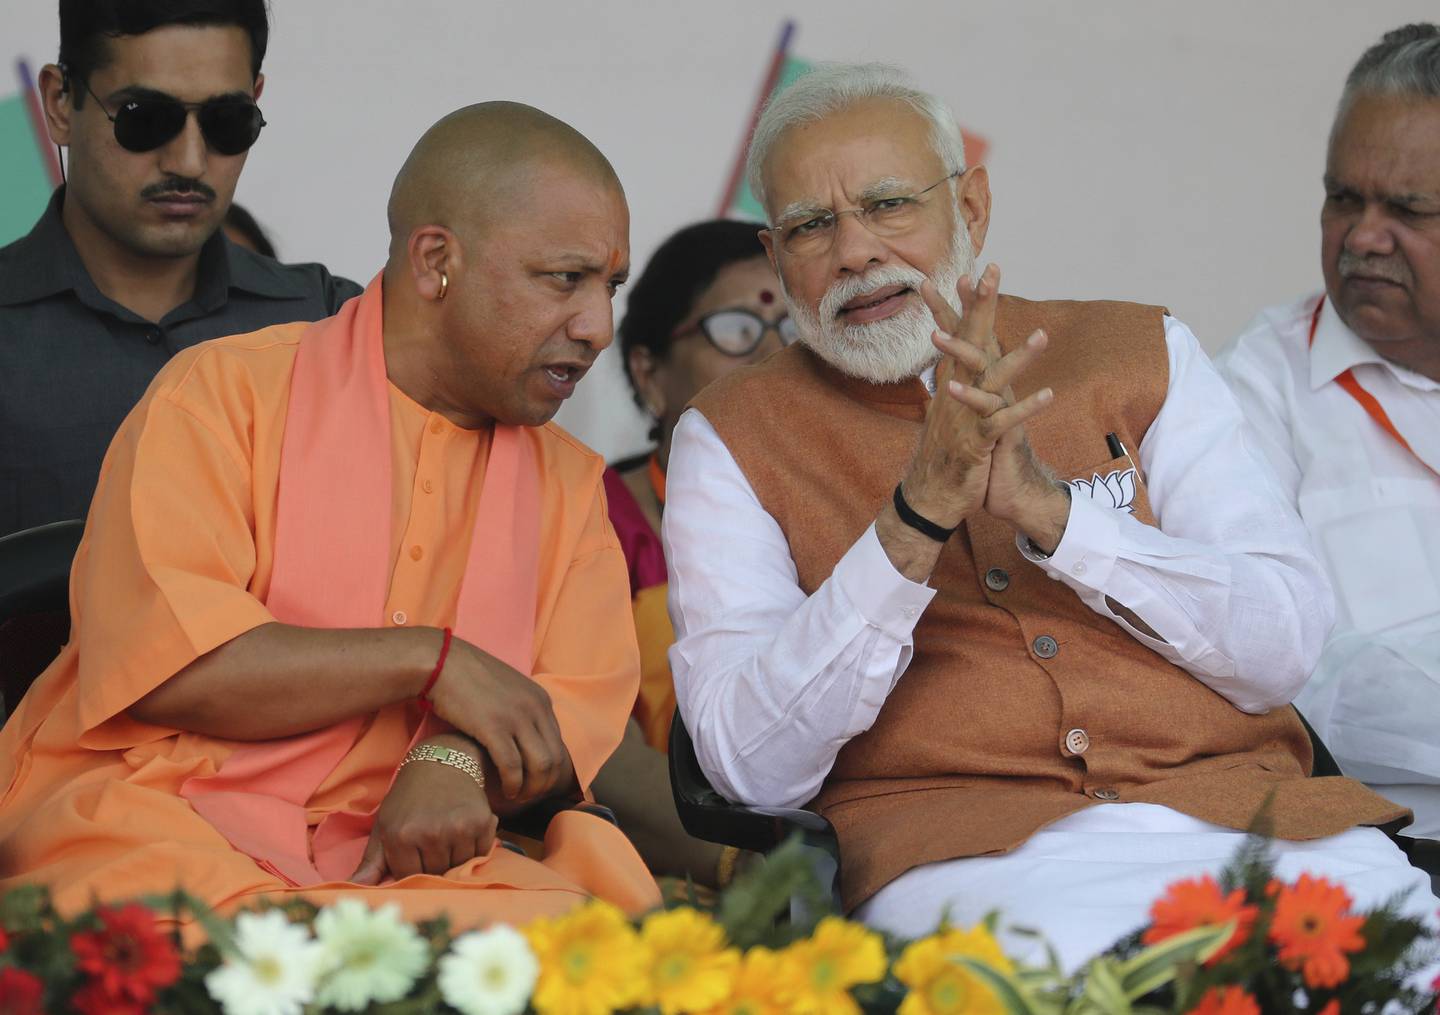 FILE- In this March 28, 2019, file photo, Indian Prime Minister Narendra Modi, right, speaks with Chief Minister of Uttar Pradesh state Yogi Adityanath during an election campaign rally in Meerut, India. Indias ruling Hindu nationalist party has approved legislation in Uttar Pradesh, the countrys most populous state, that lays out a prison term of up to 10 years for anyone found guilty of using marriage to force someone to change religion. The decree was passed Tuesday and follows a campaign by Modis Hindu-nationalist Bharatiya Janata Party against interfaith marriages. The party describes such marriages as love jihad, an unproven conspiracy theory used by its leaders and Hindu hard-line groups to accuse Muslim men of converting Hindu women by marriage. (AP Photo/Altaf Qadri, File)